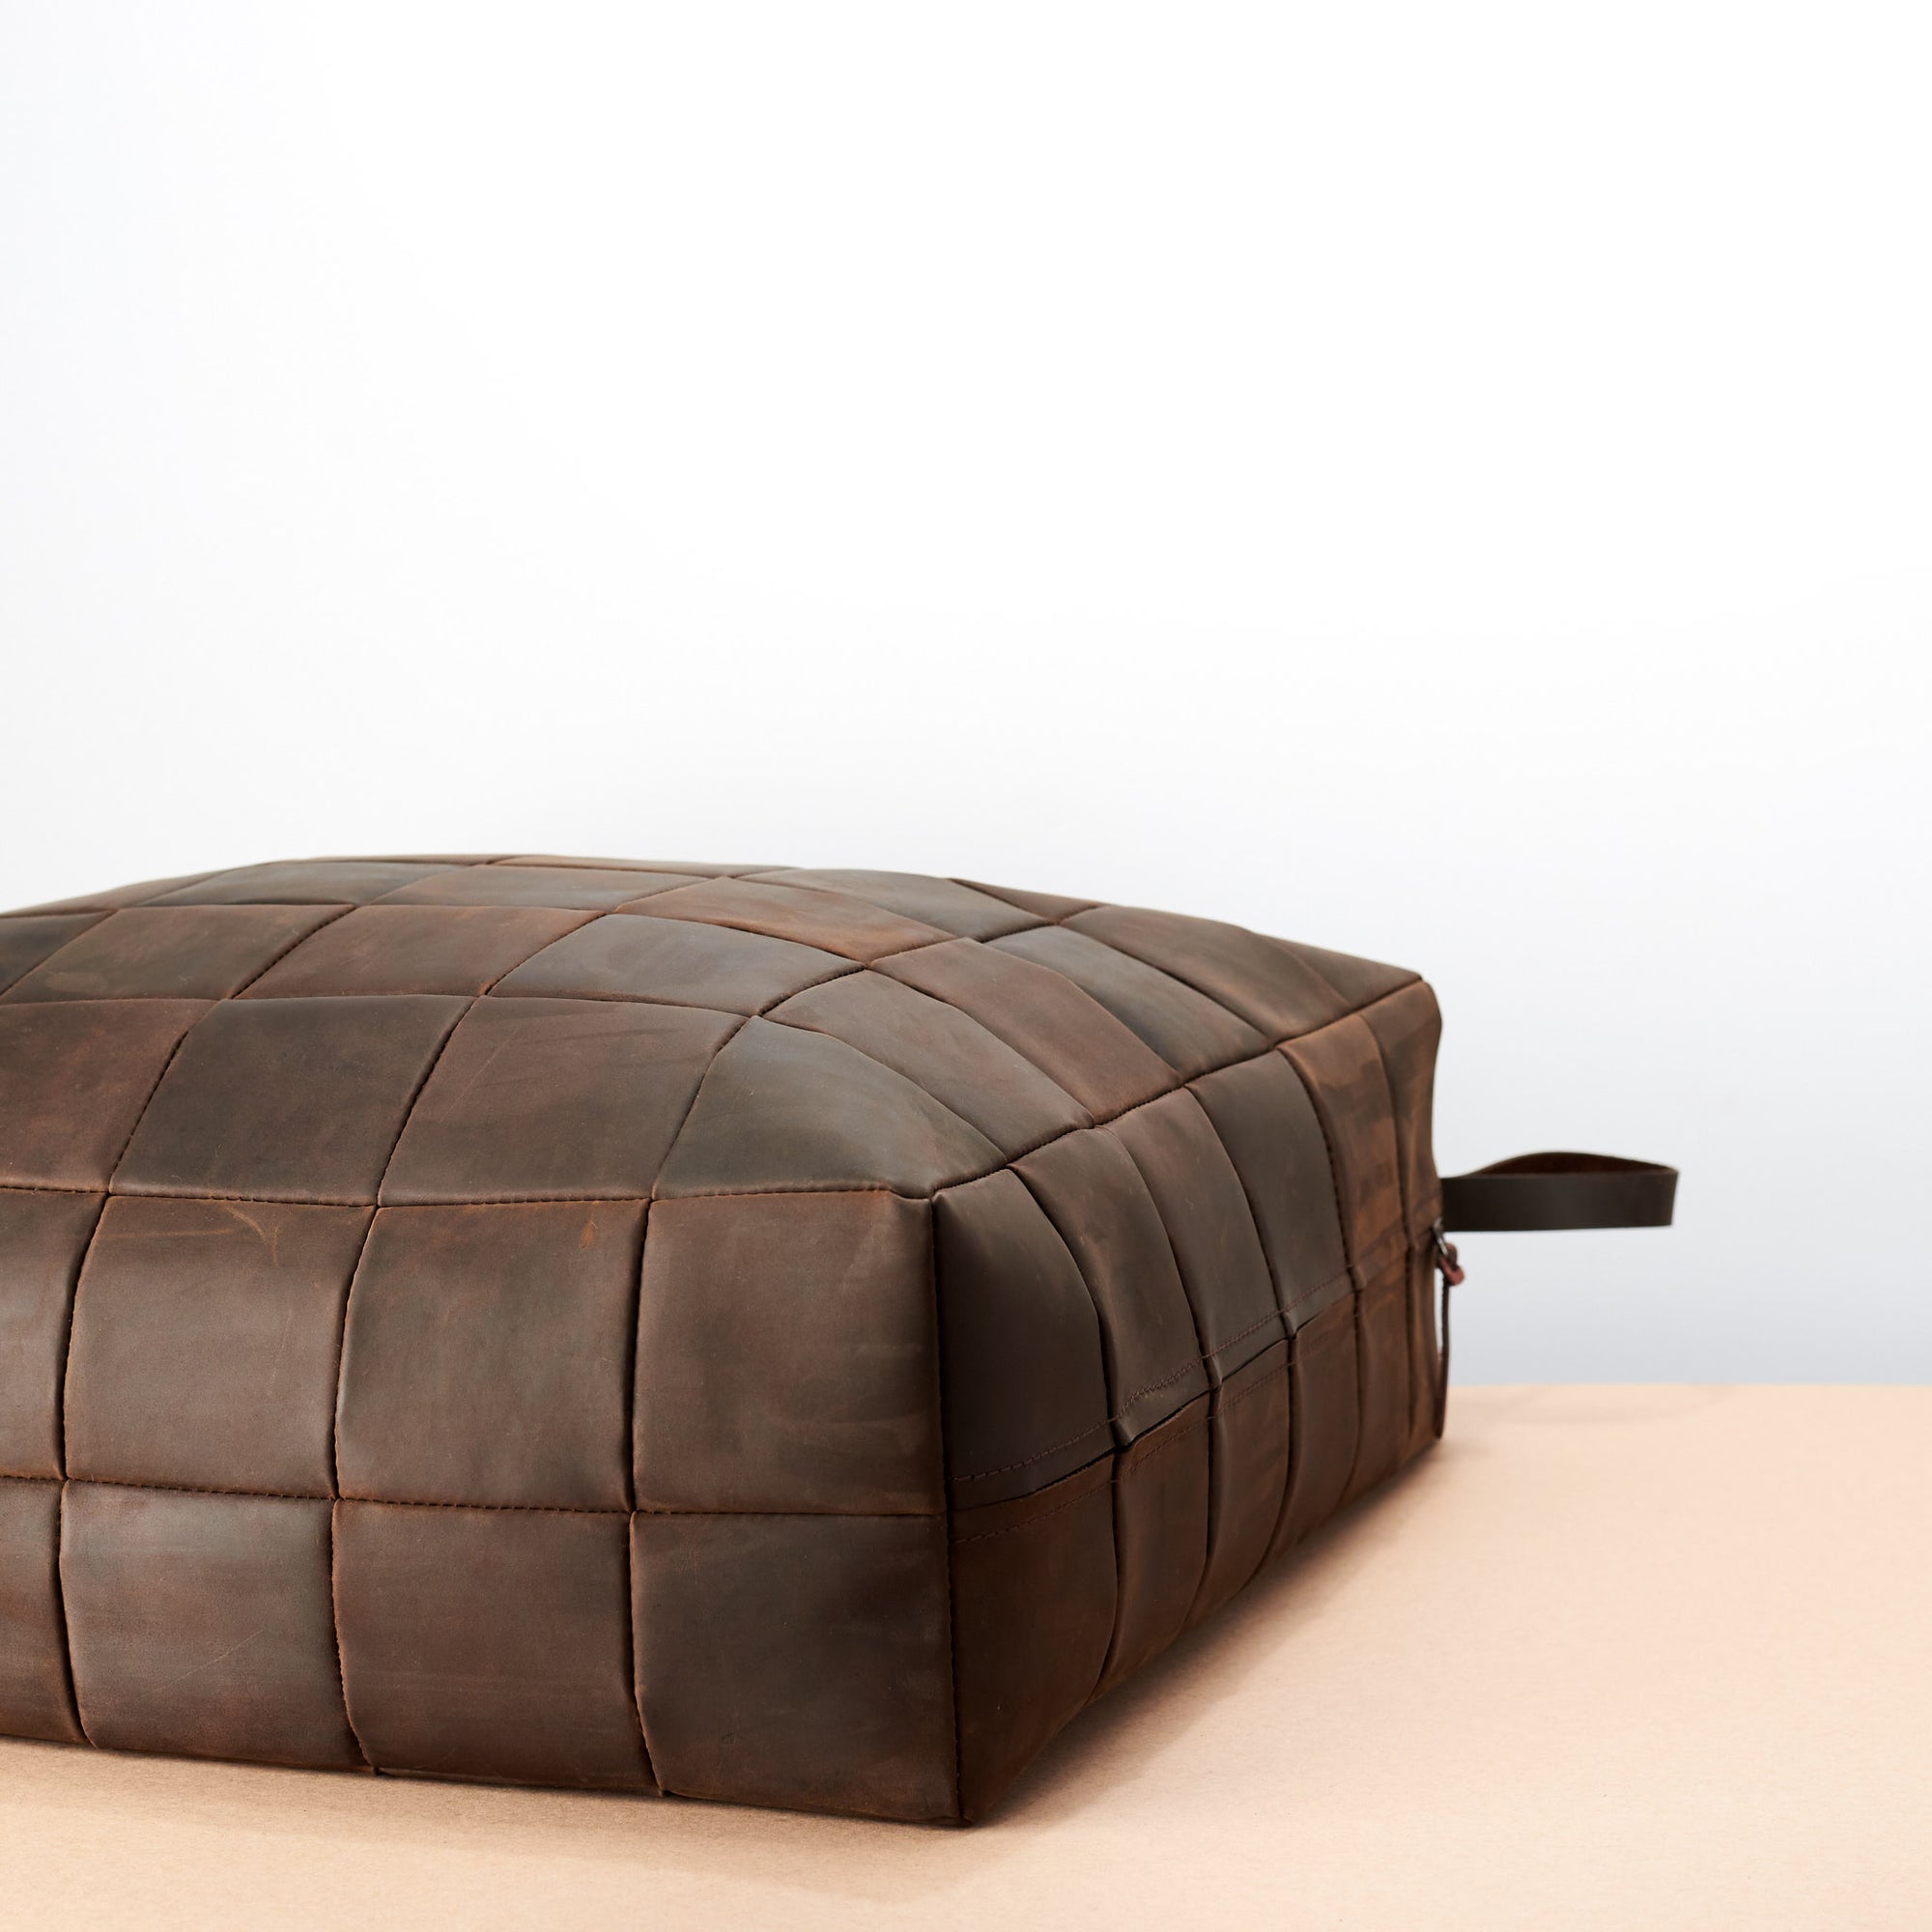 Brown Leather square floor cushion pillow.